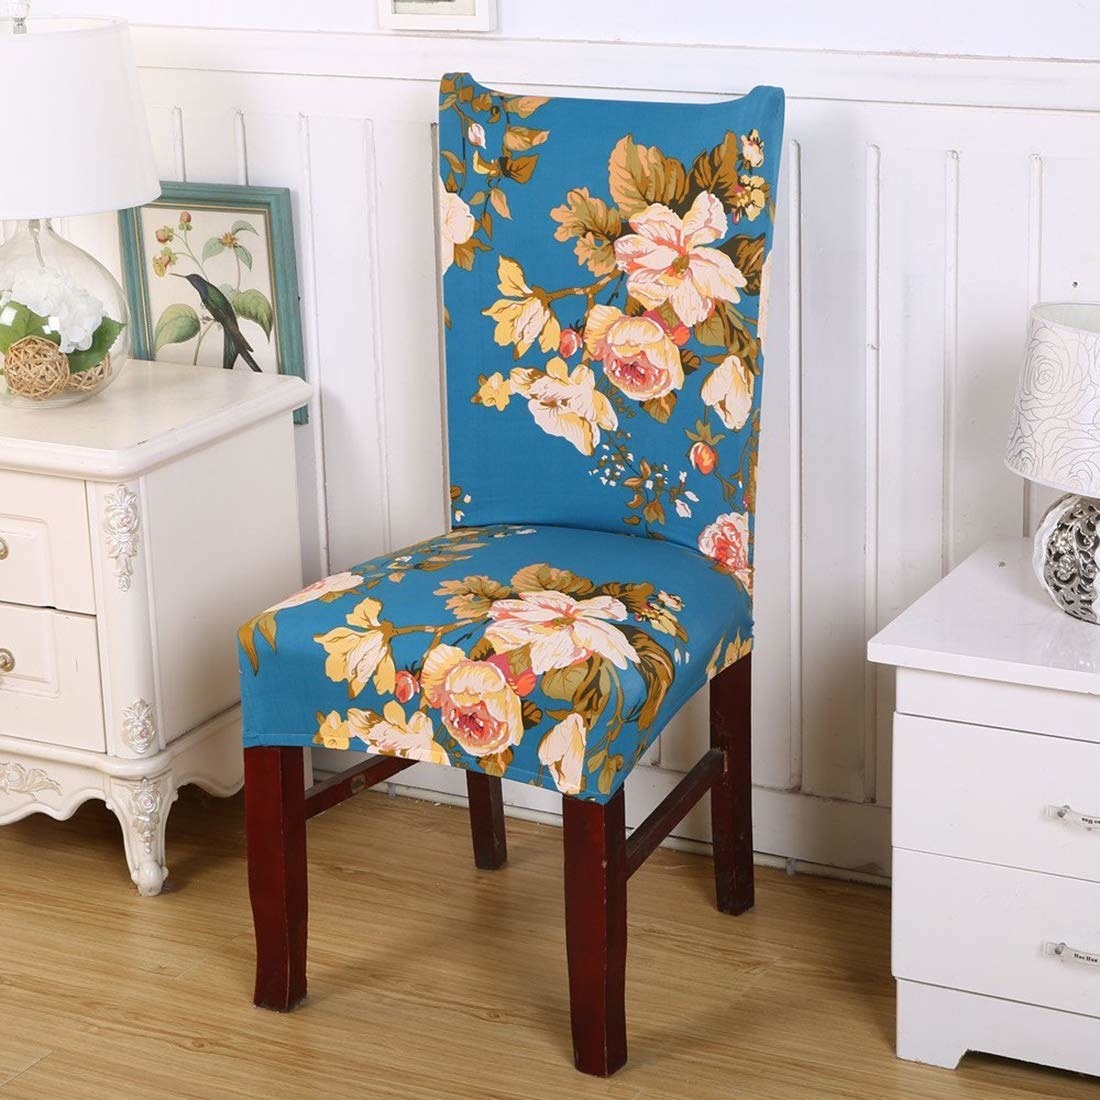 A blue floral chair cover on a chair next to a wadrobe